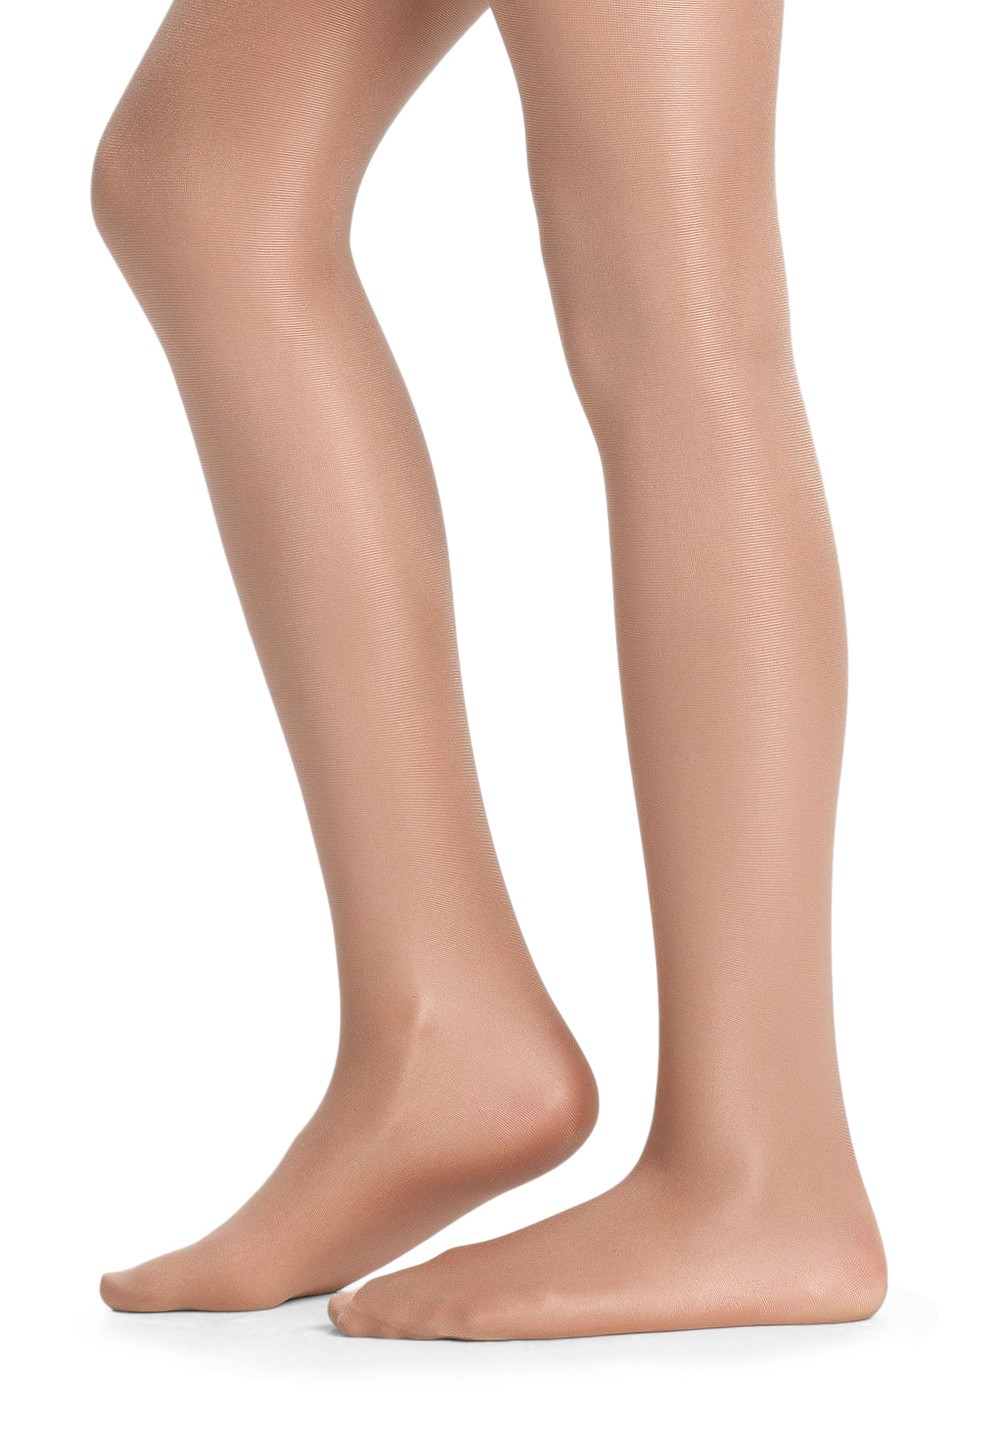 Children Tights – Danskin Girls Ultra Shimmery Footed Tights | Dance Tights